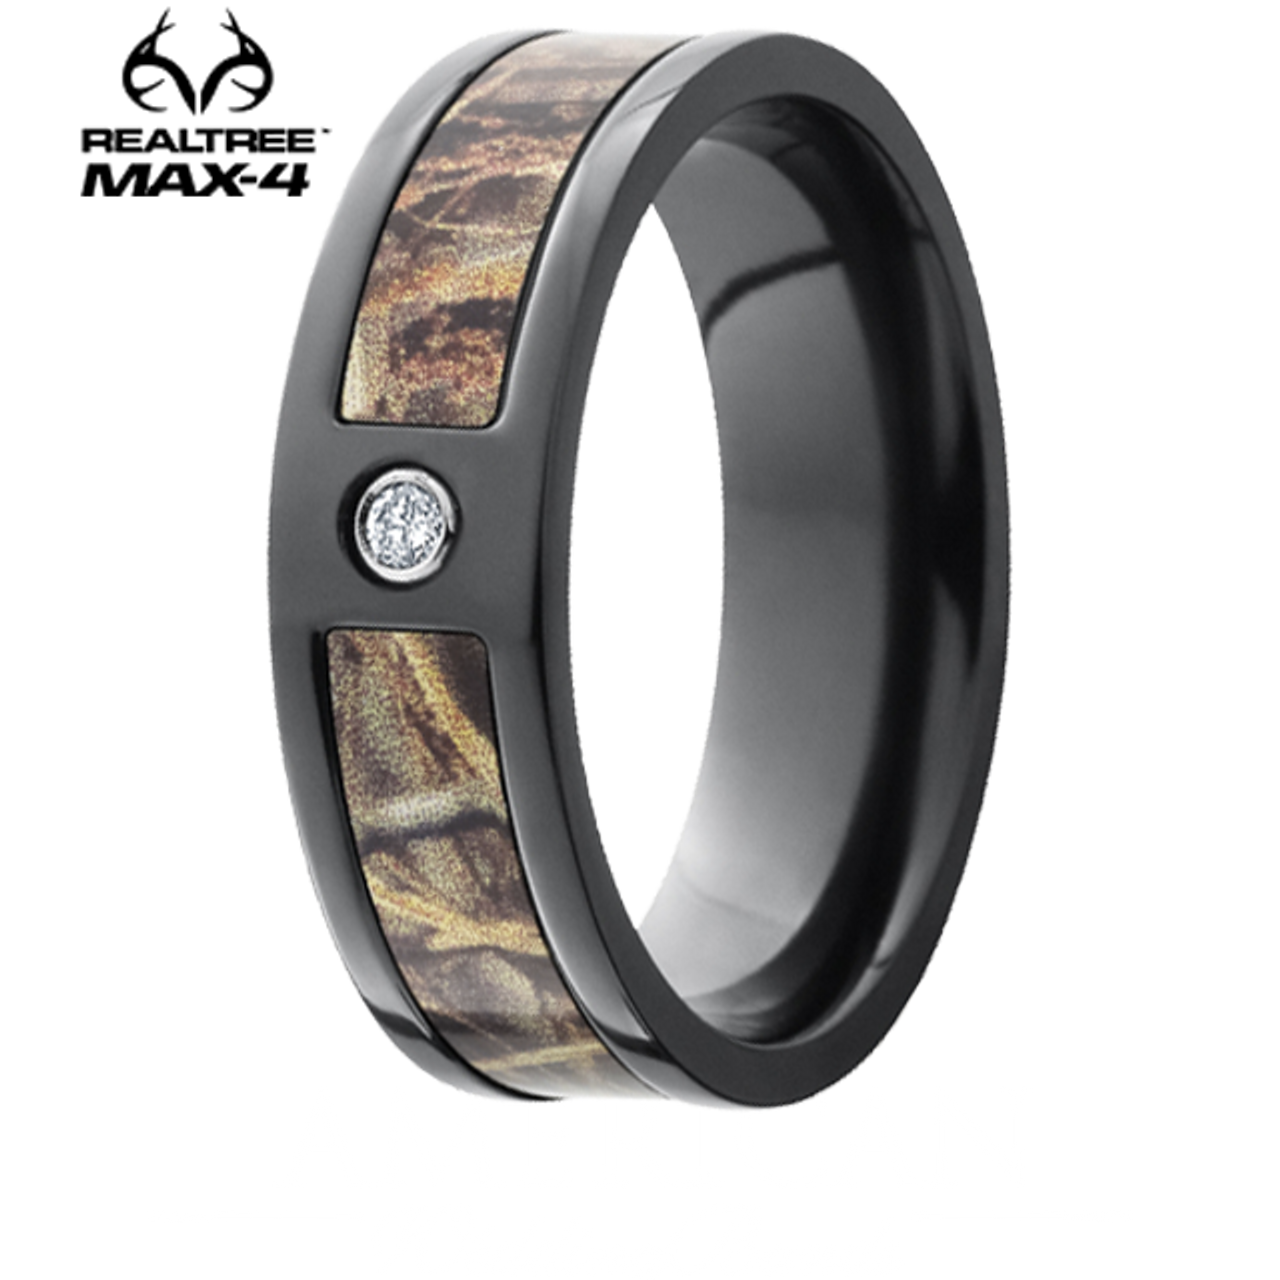 Black Camo on Silver Band Couples Ring Set With Stone | Camo wedding rings,  Couples ring set, Wedding rings